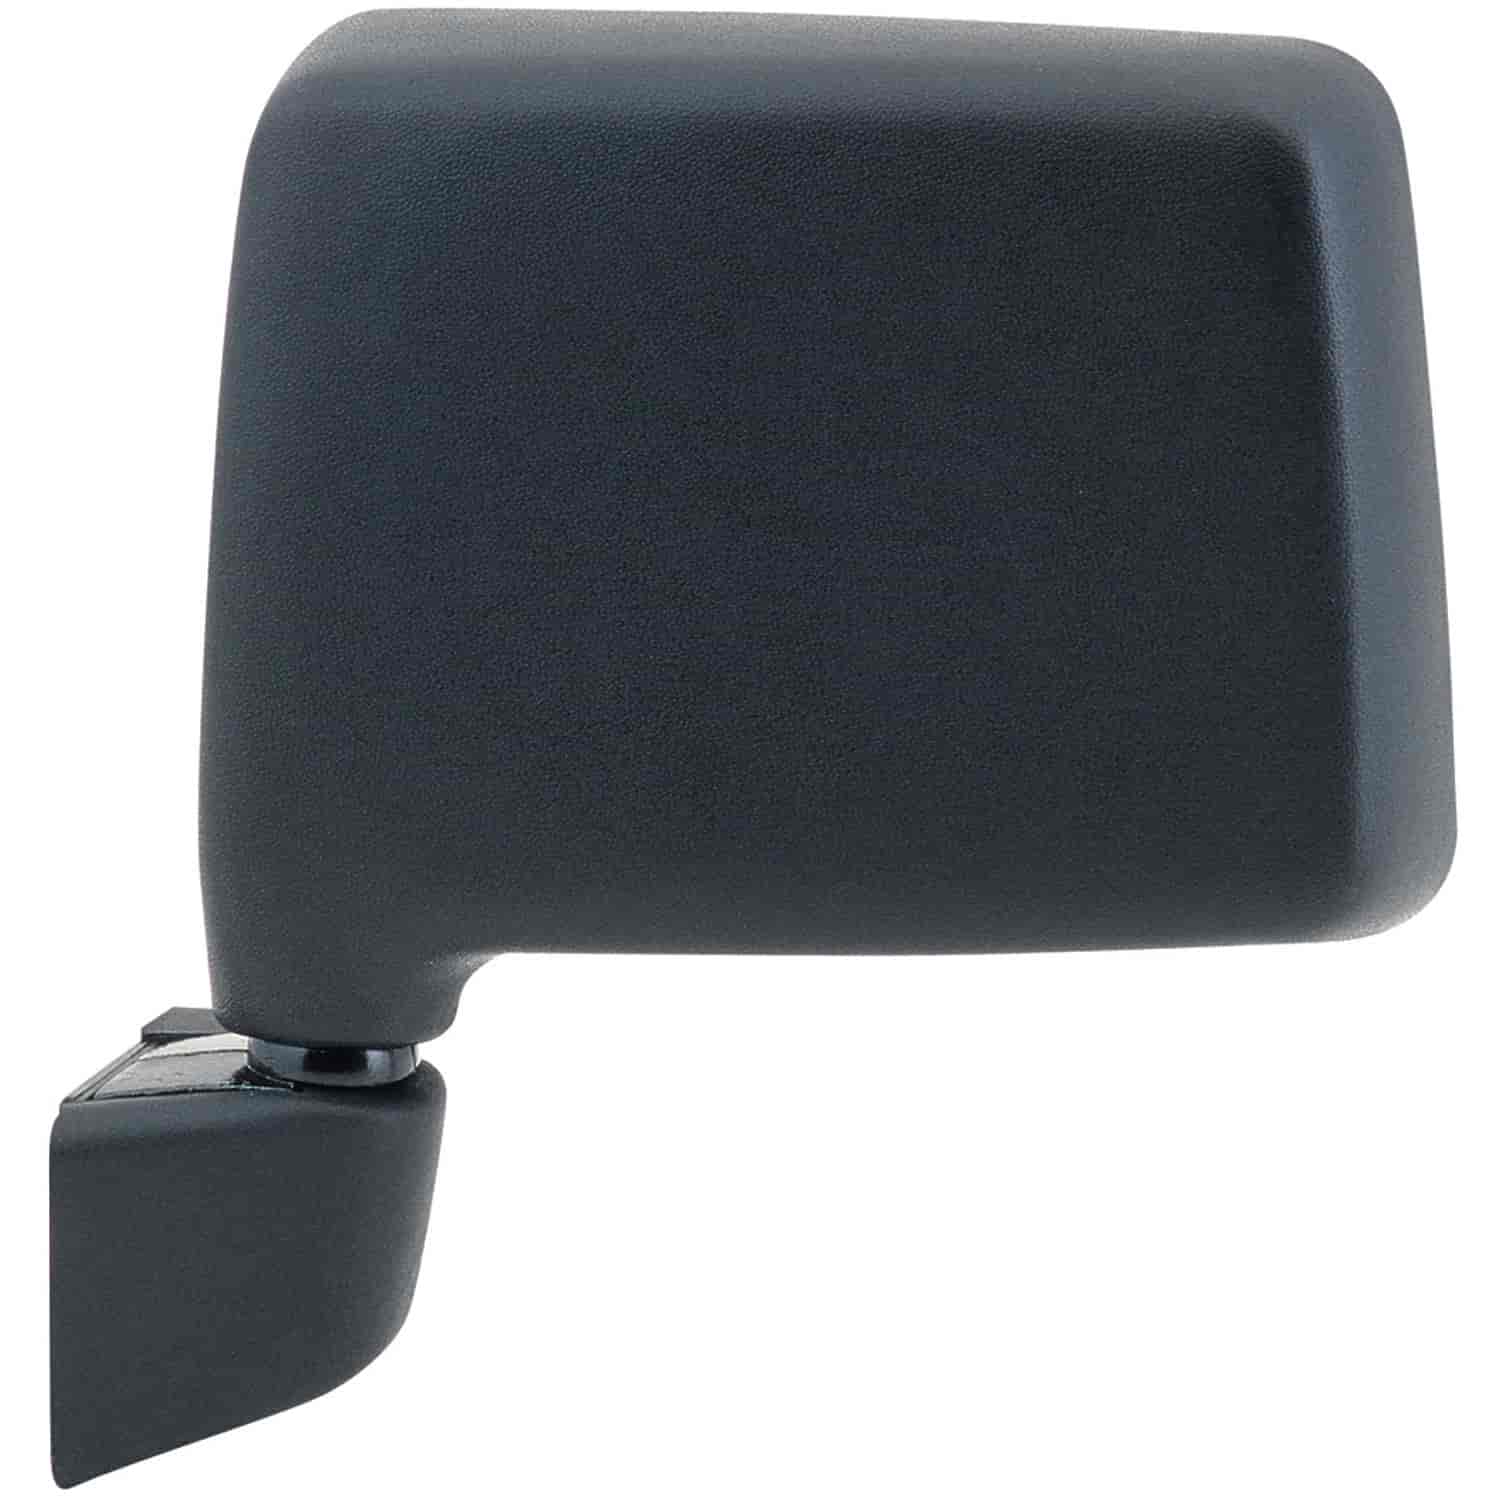 OEM Style Replacement mirror for 87-95 Suzuki Samurai driver side mirror tested to fit and function